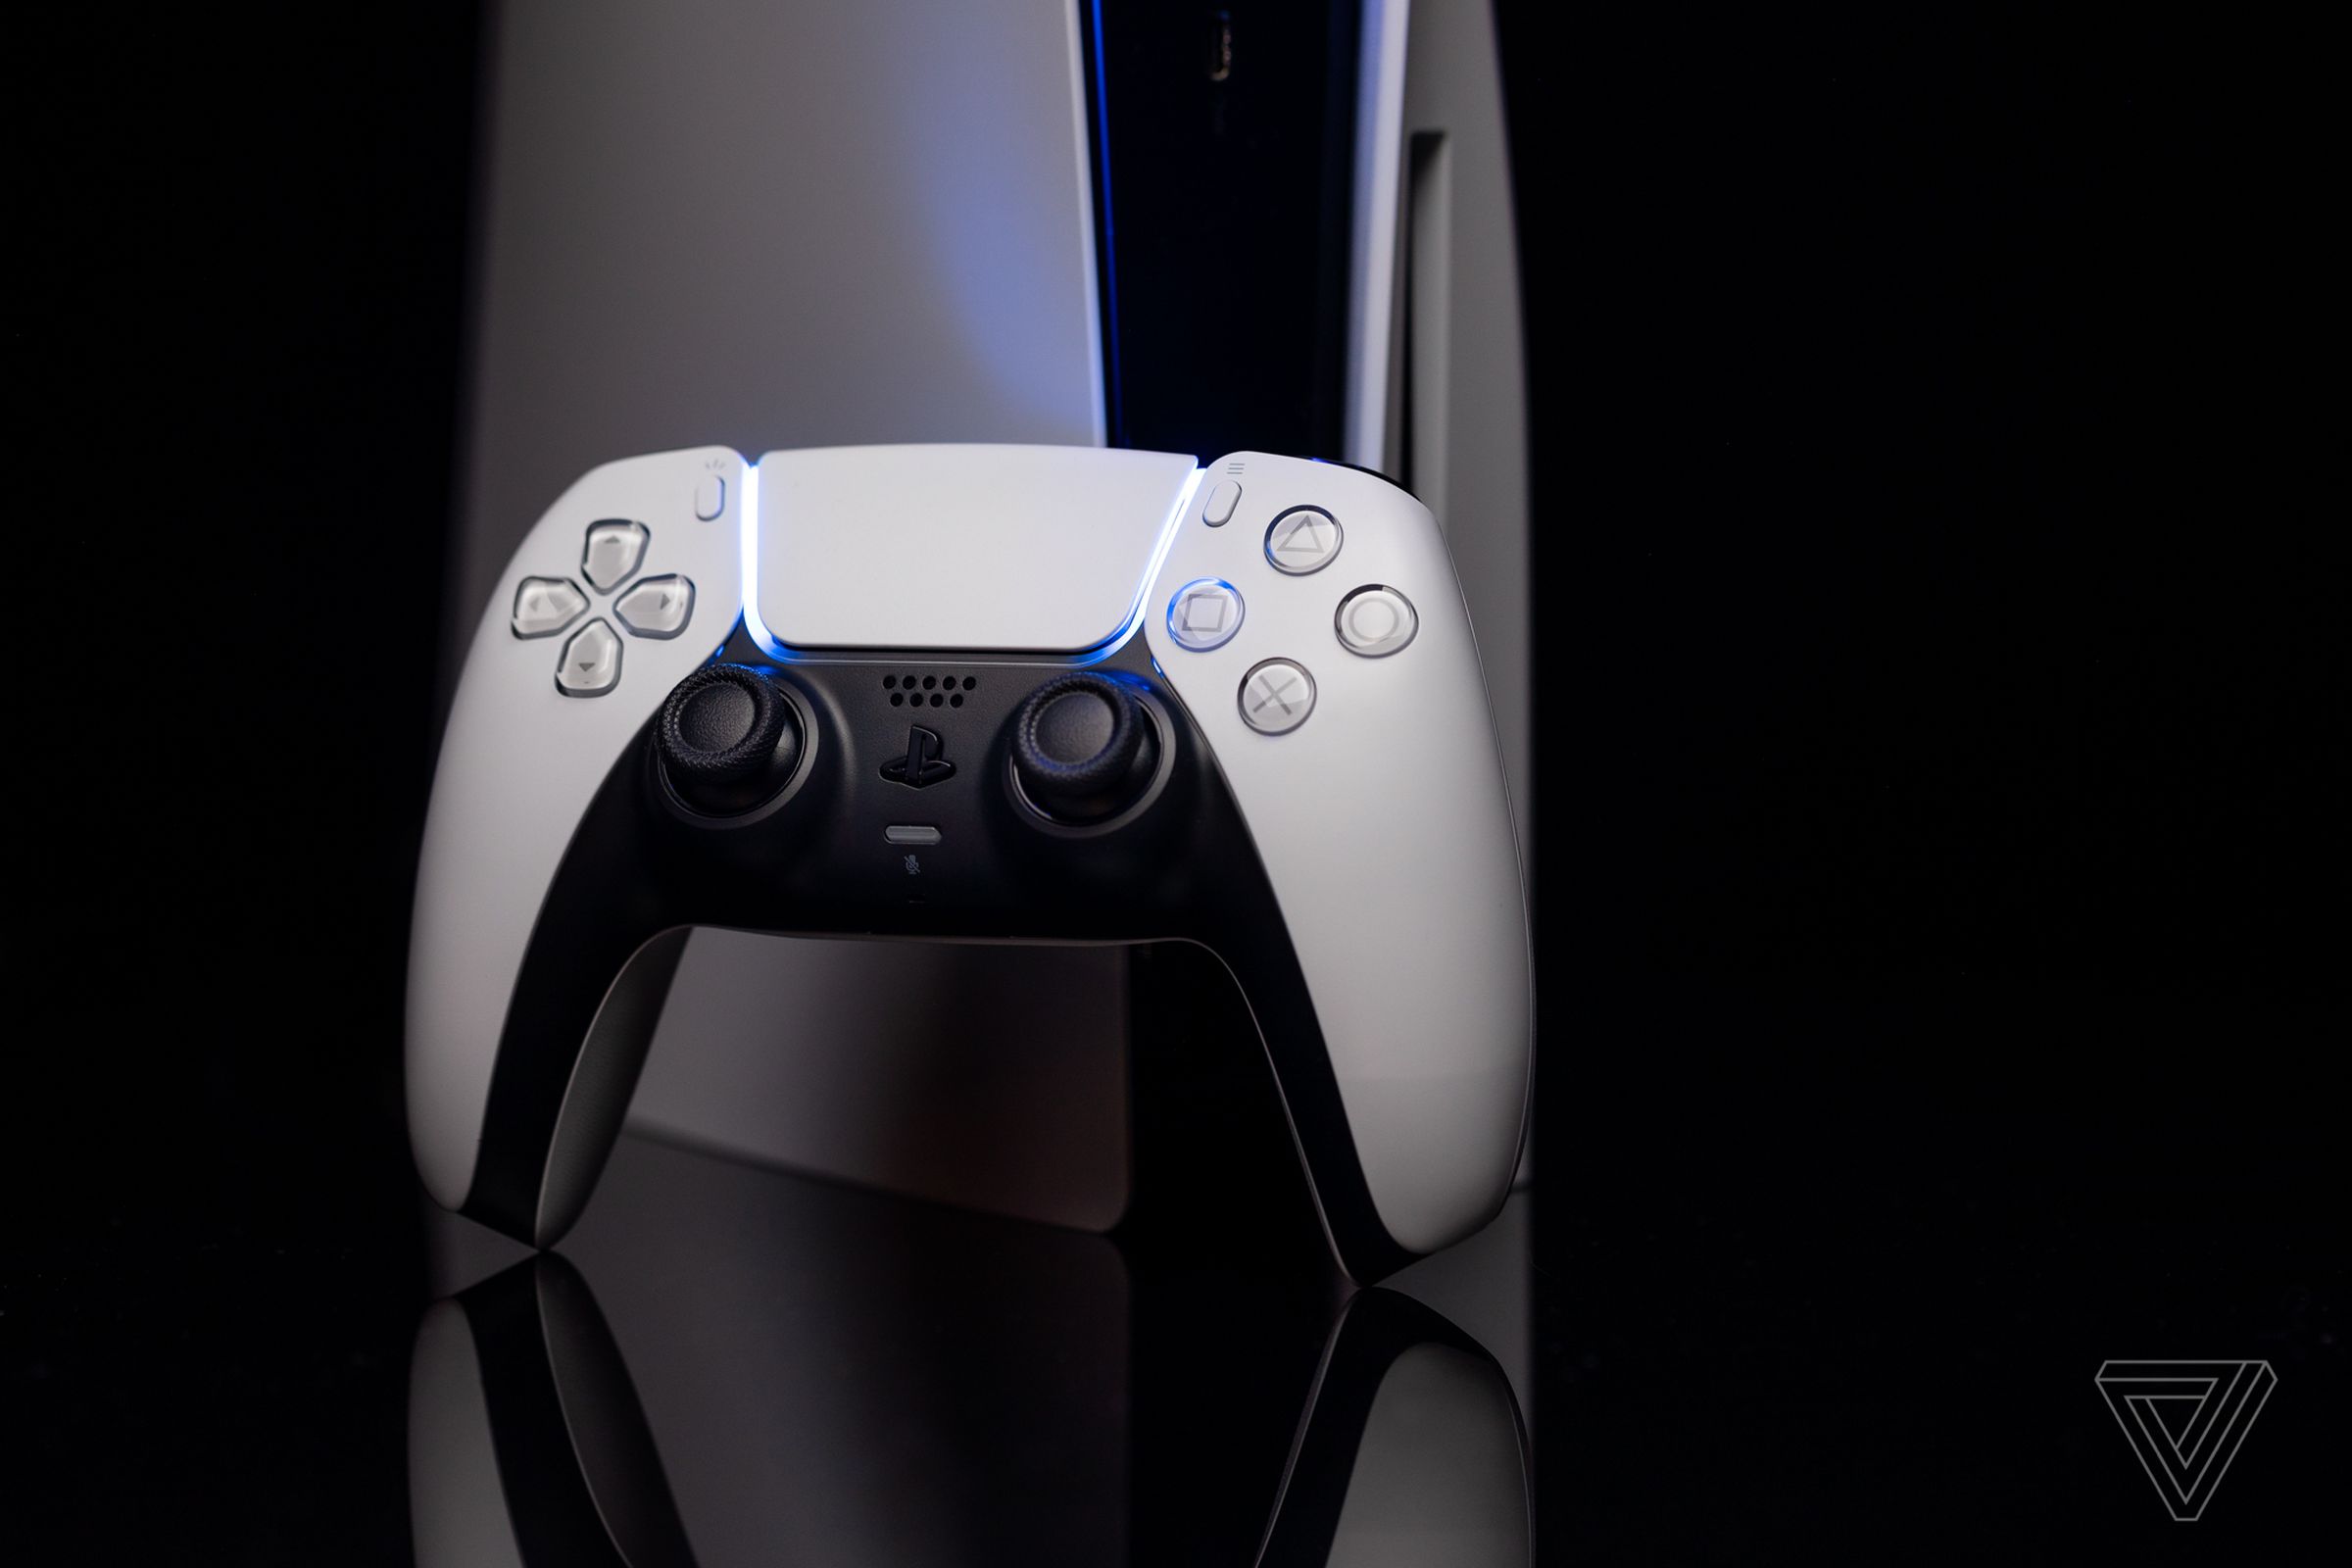 The DualSense controller comes with every PS5 console.